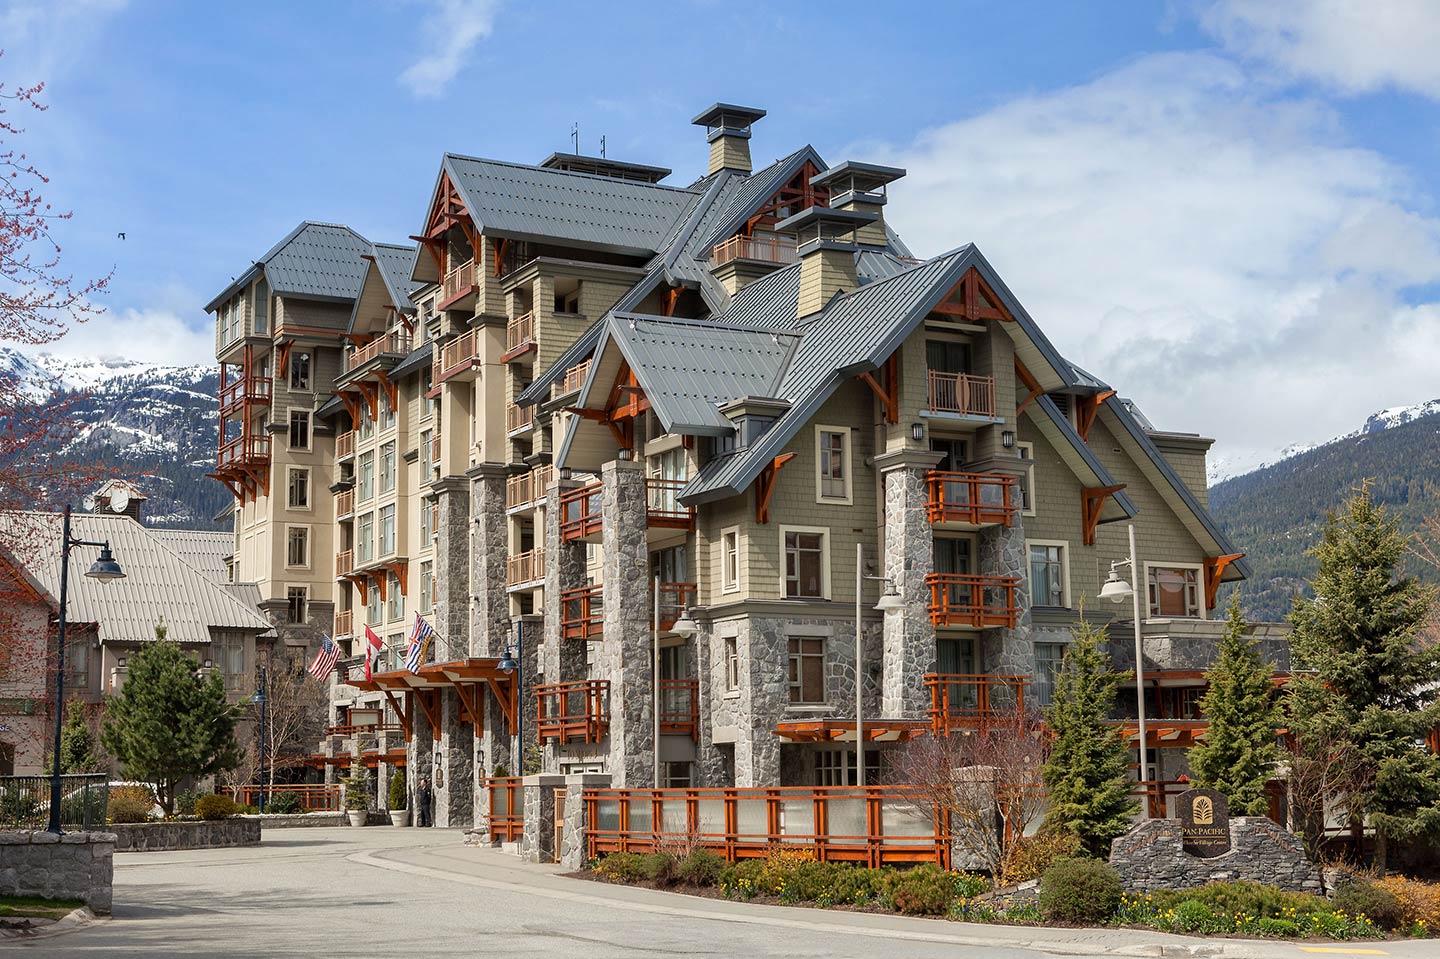 Beautiful building in Whistler